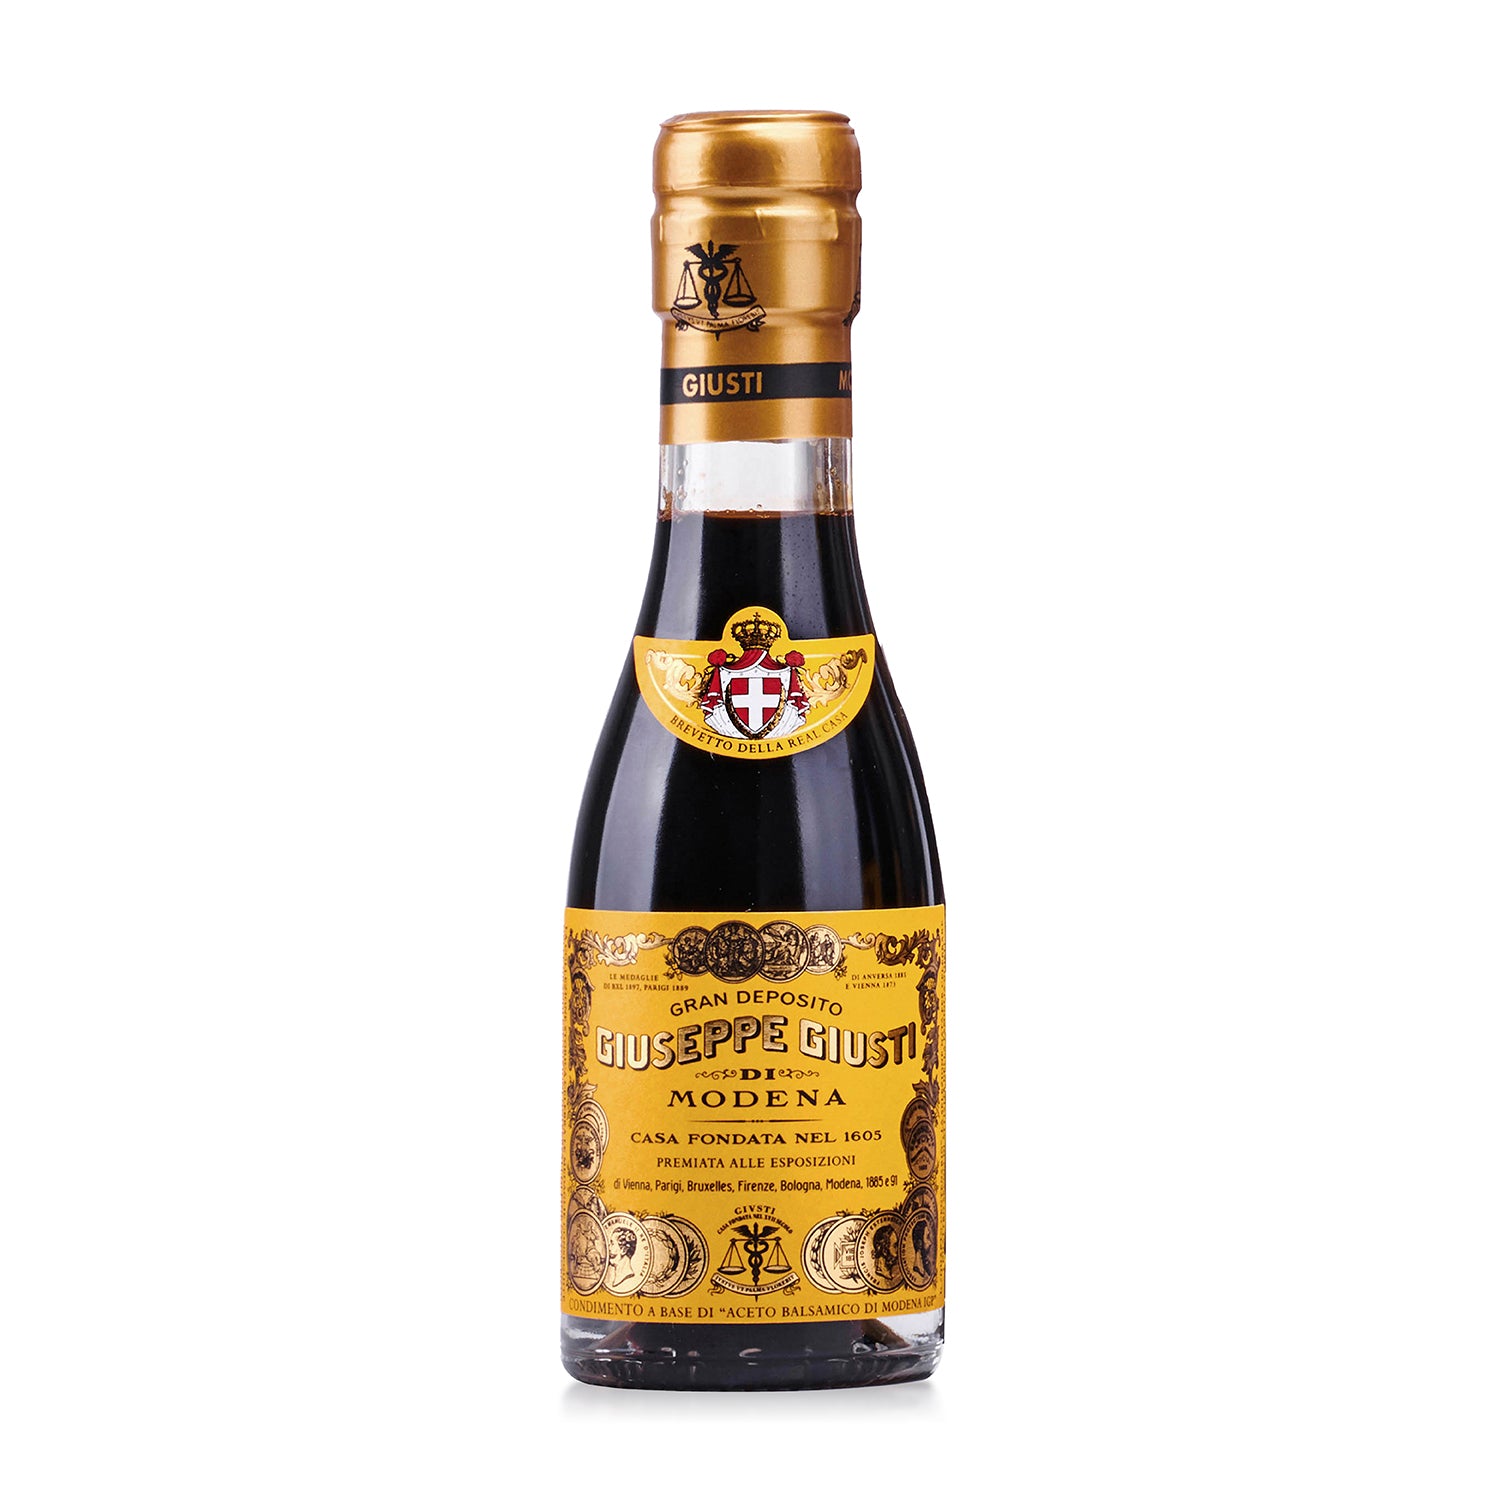 Aged (15yr) Balsamic Vinegar of Modena - IGP - 4 Gold Medals - by Giusti